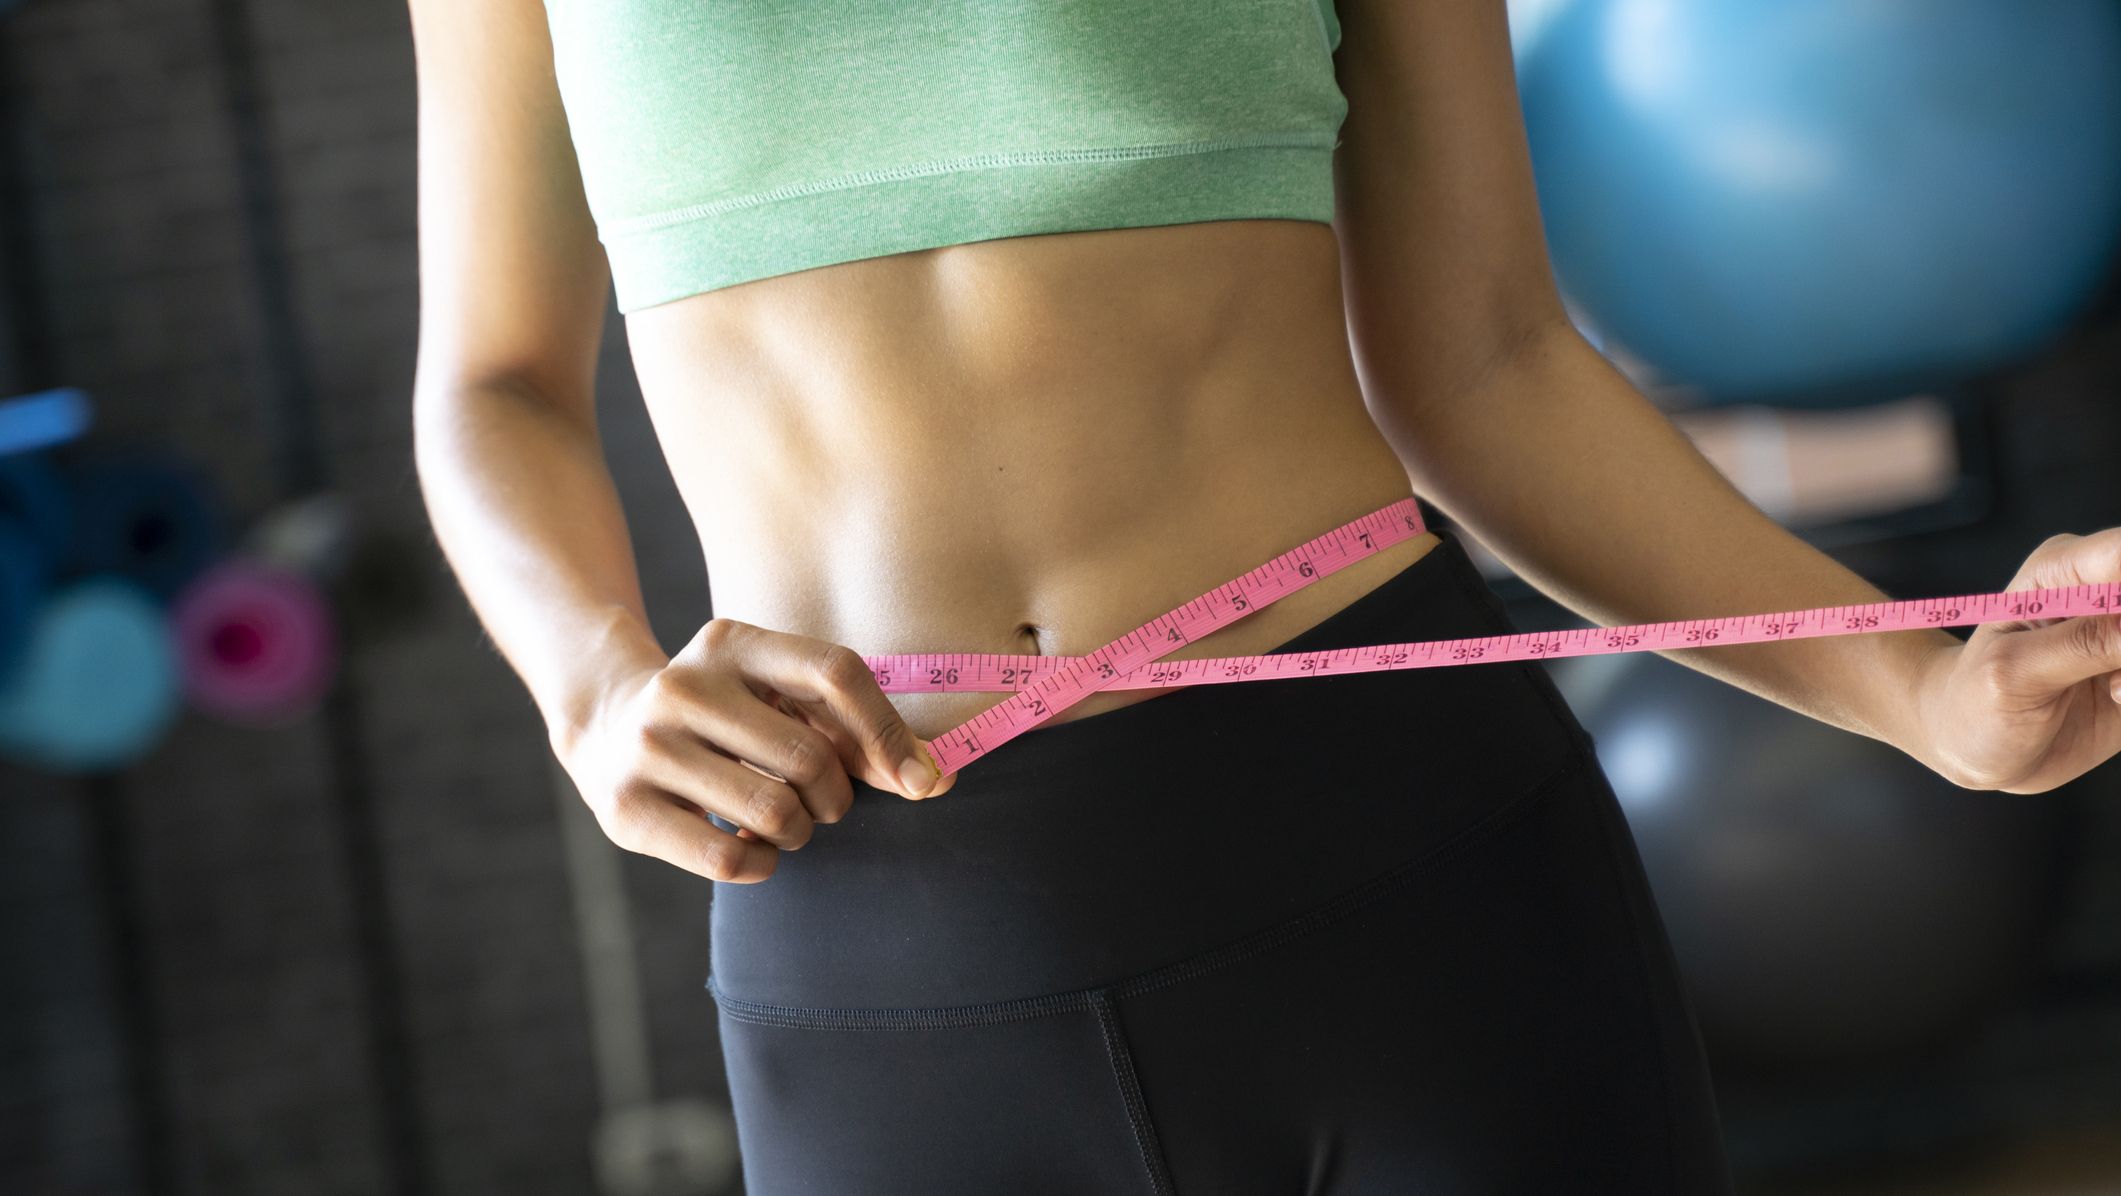 5 Reasons Your Weight Fluctuates